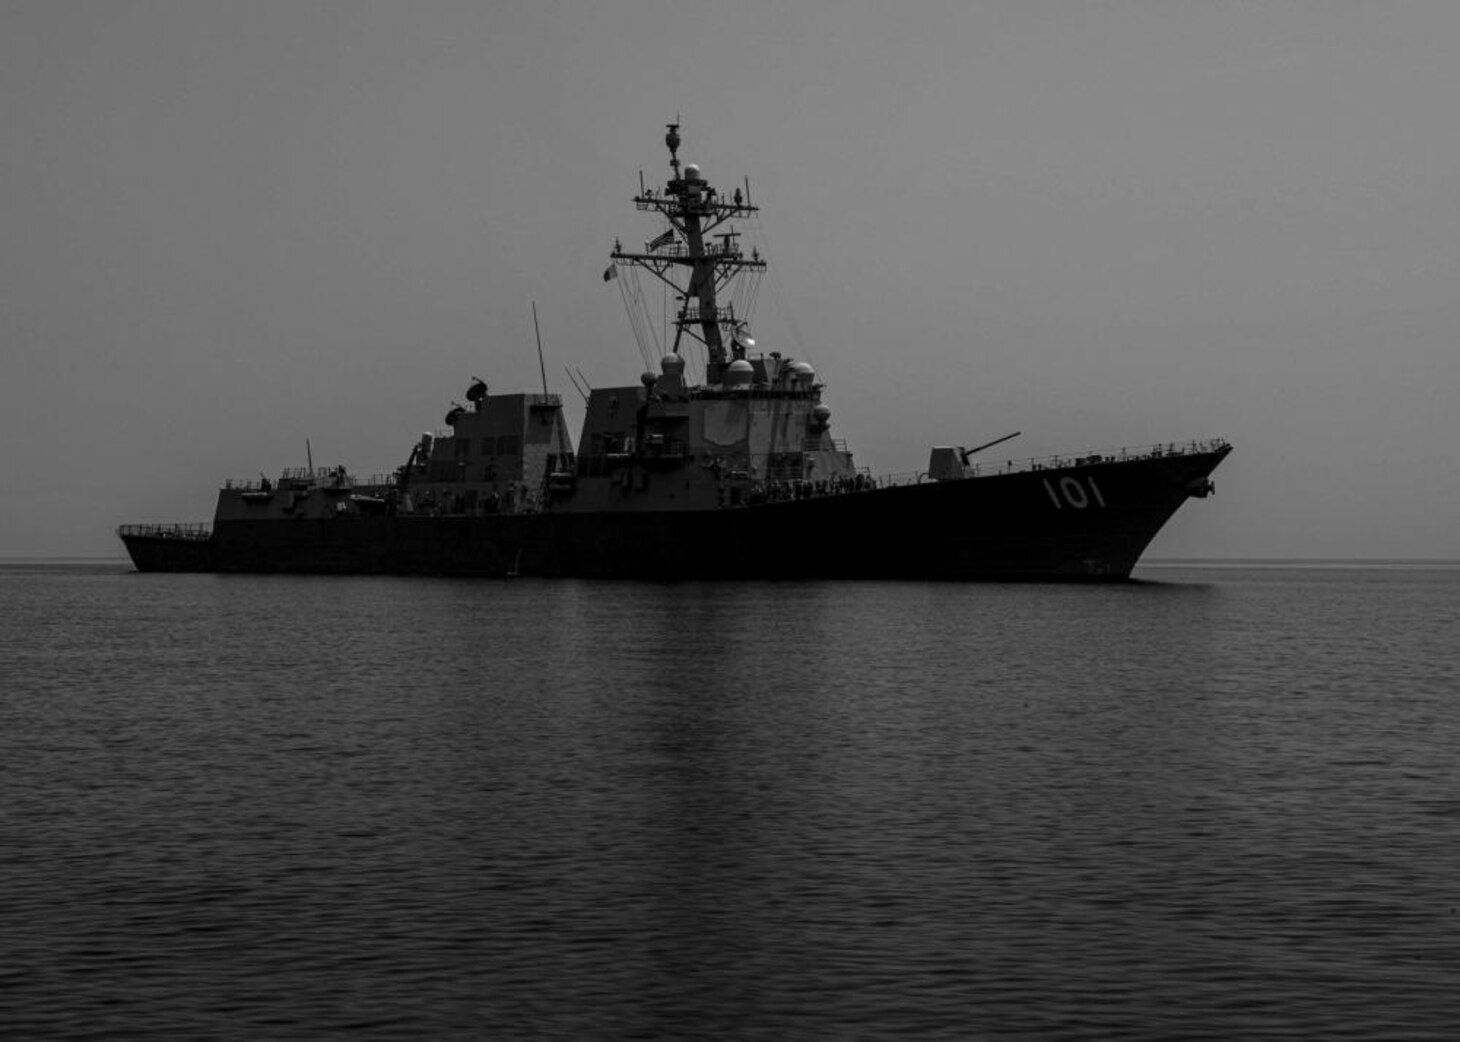 The guided-missile destroyer USS Gridley (DDG 101) transits the Gulf of Oman during a search and rescue drill, April 15.